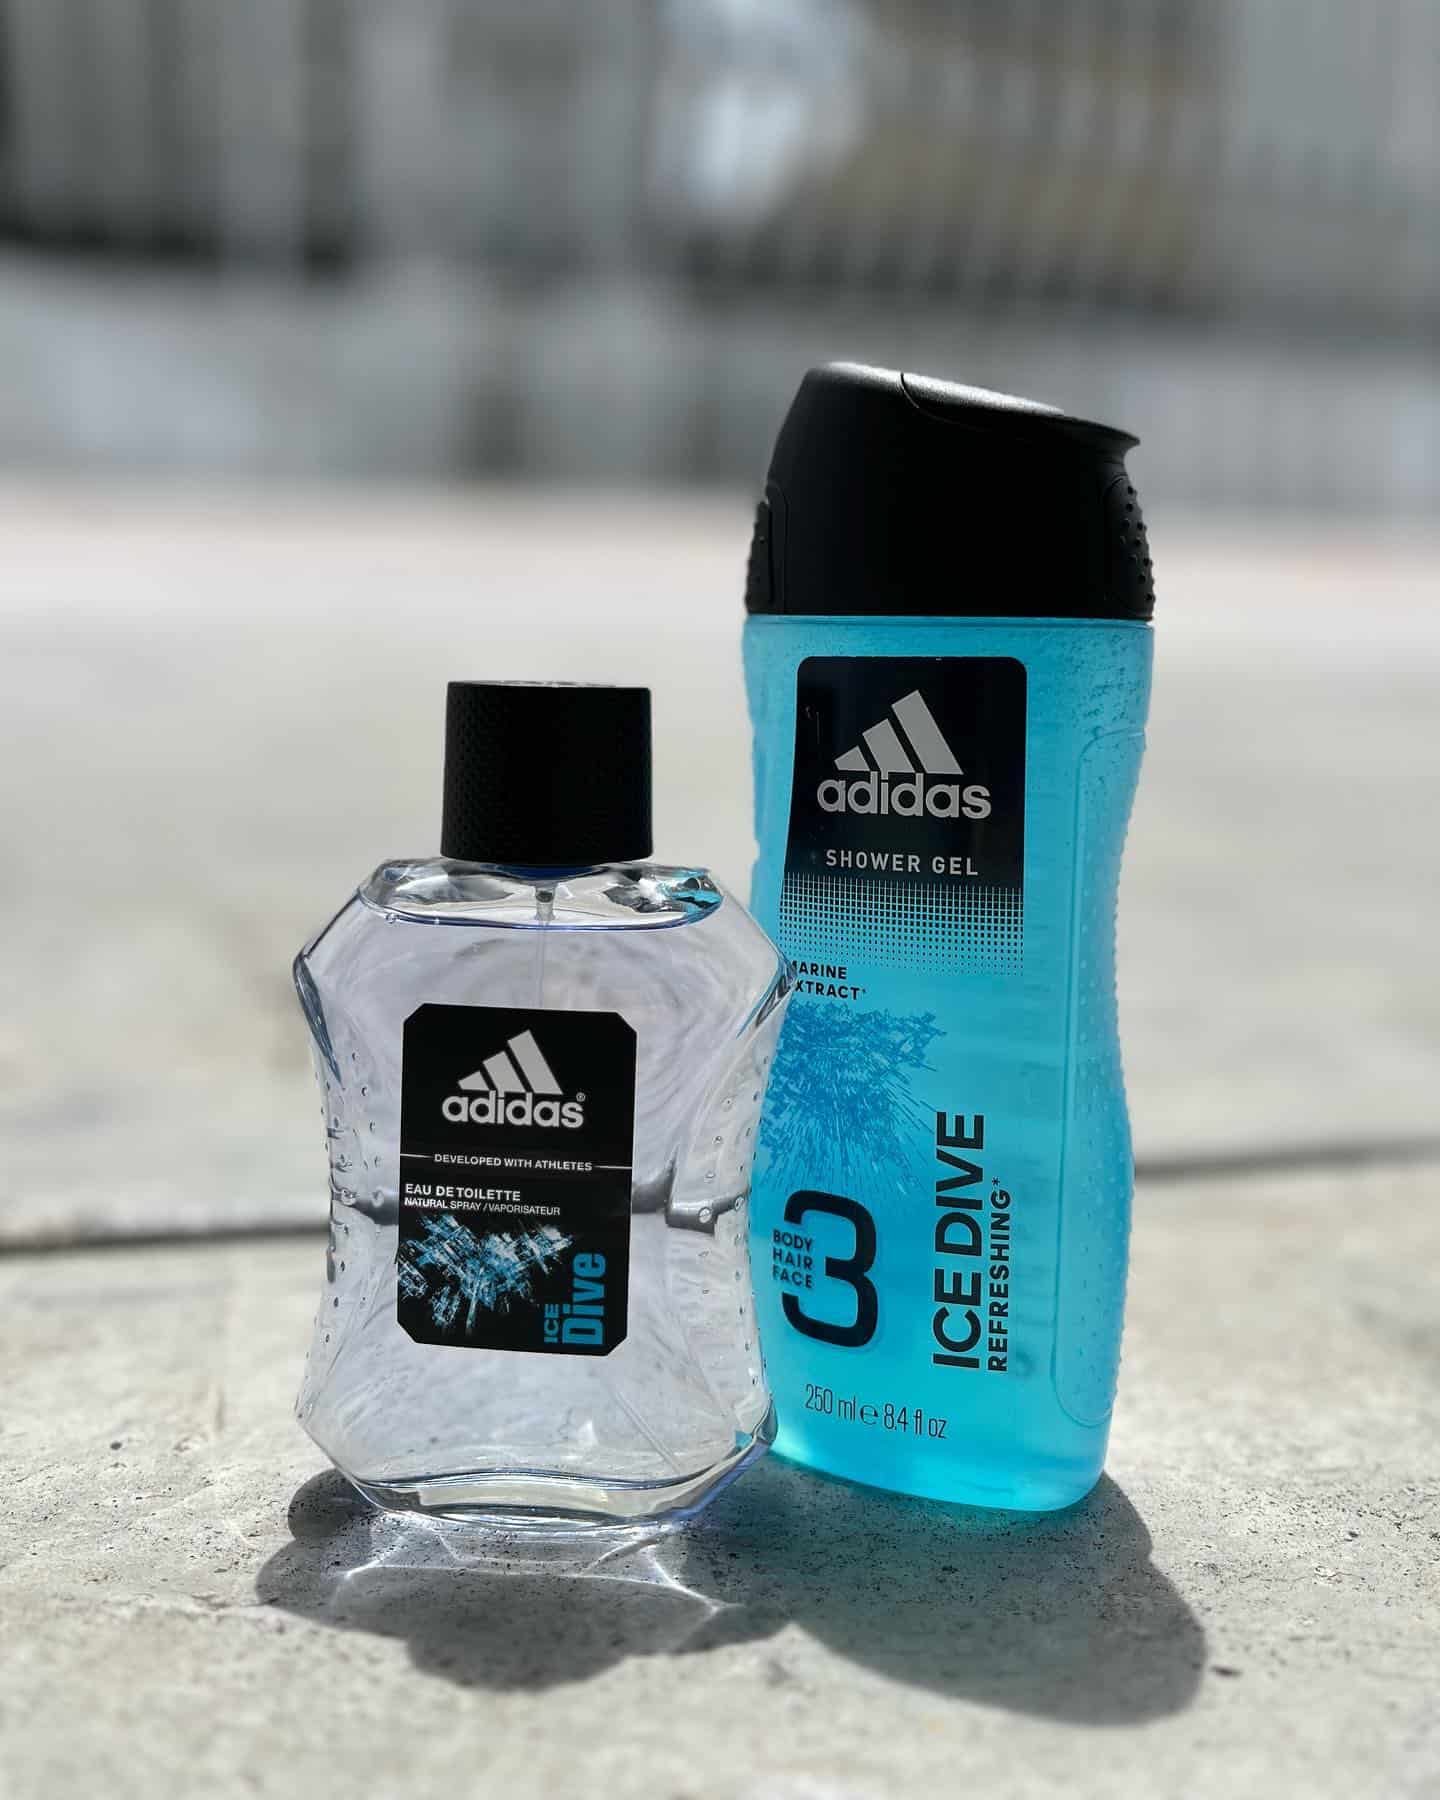 bottles of adidas dive cologne and shower gel on the ground